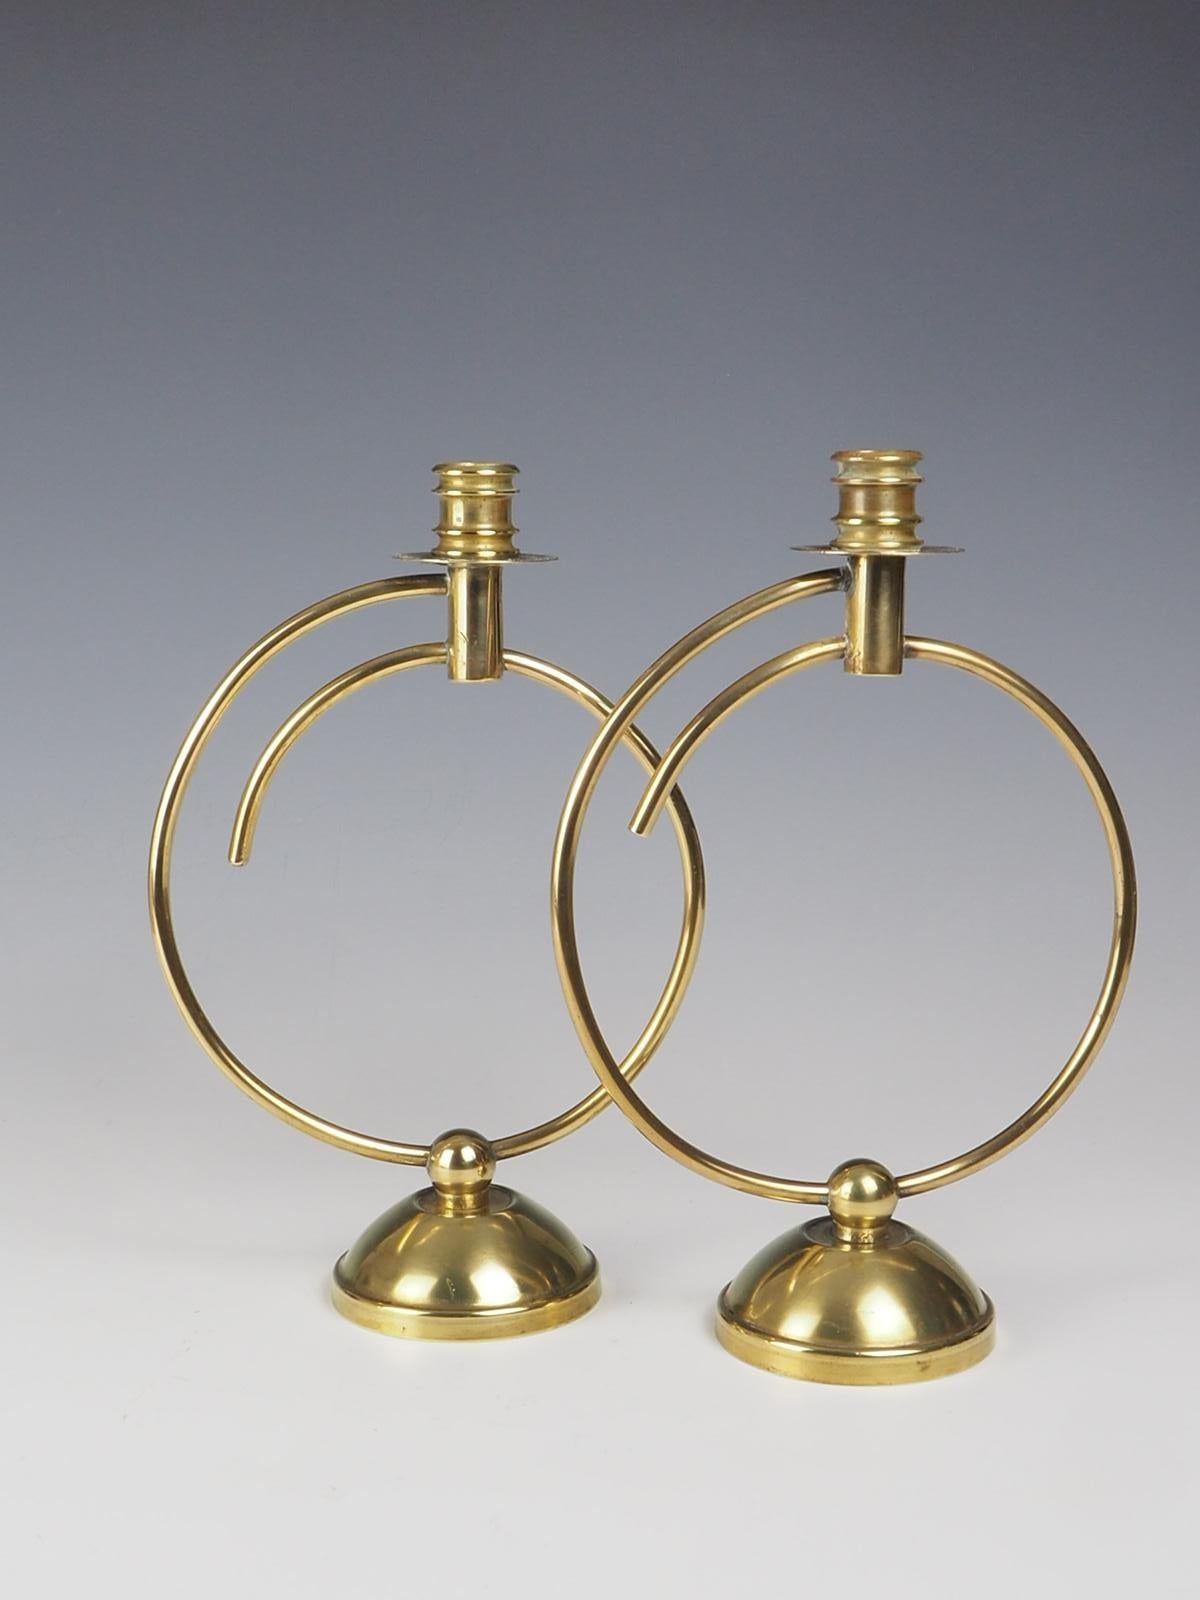 Exquisite pair of Art Deco Brass Candlesticks. Crafted with attention to detail, these candlesticks exude opulence and sophistication. The sleek and slender design features a lustrous brass finish that adds a touch of glamour to any room.

These